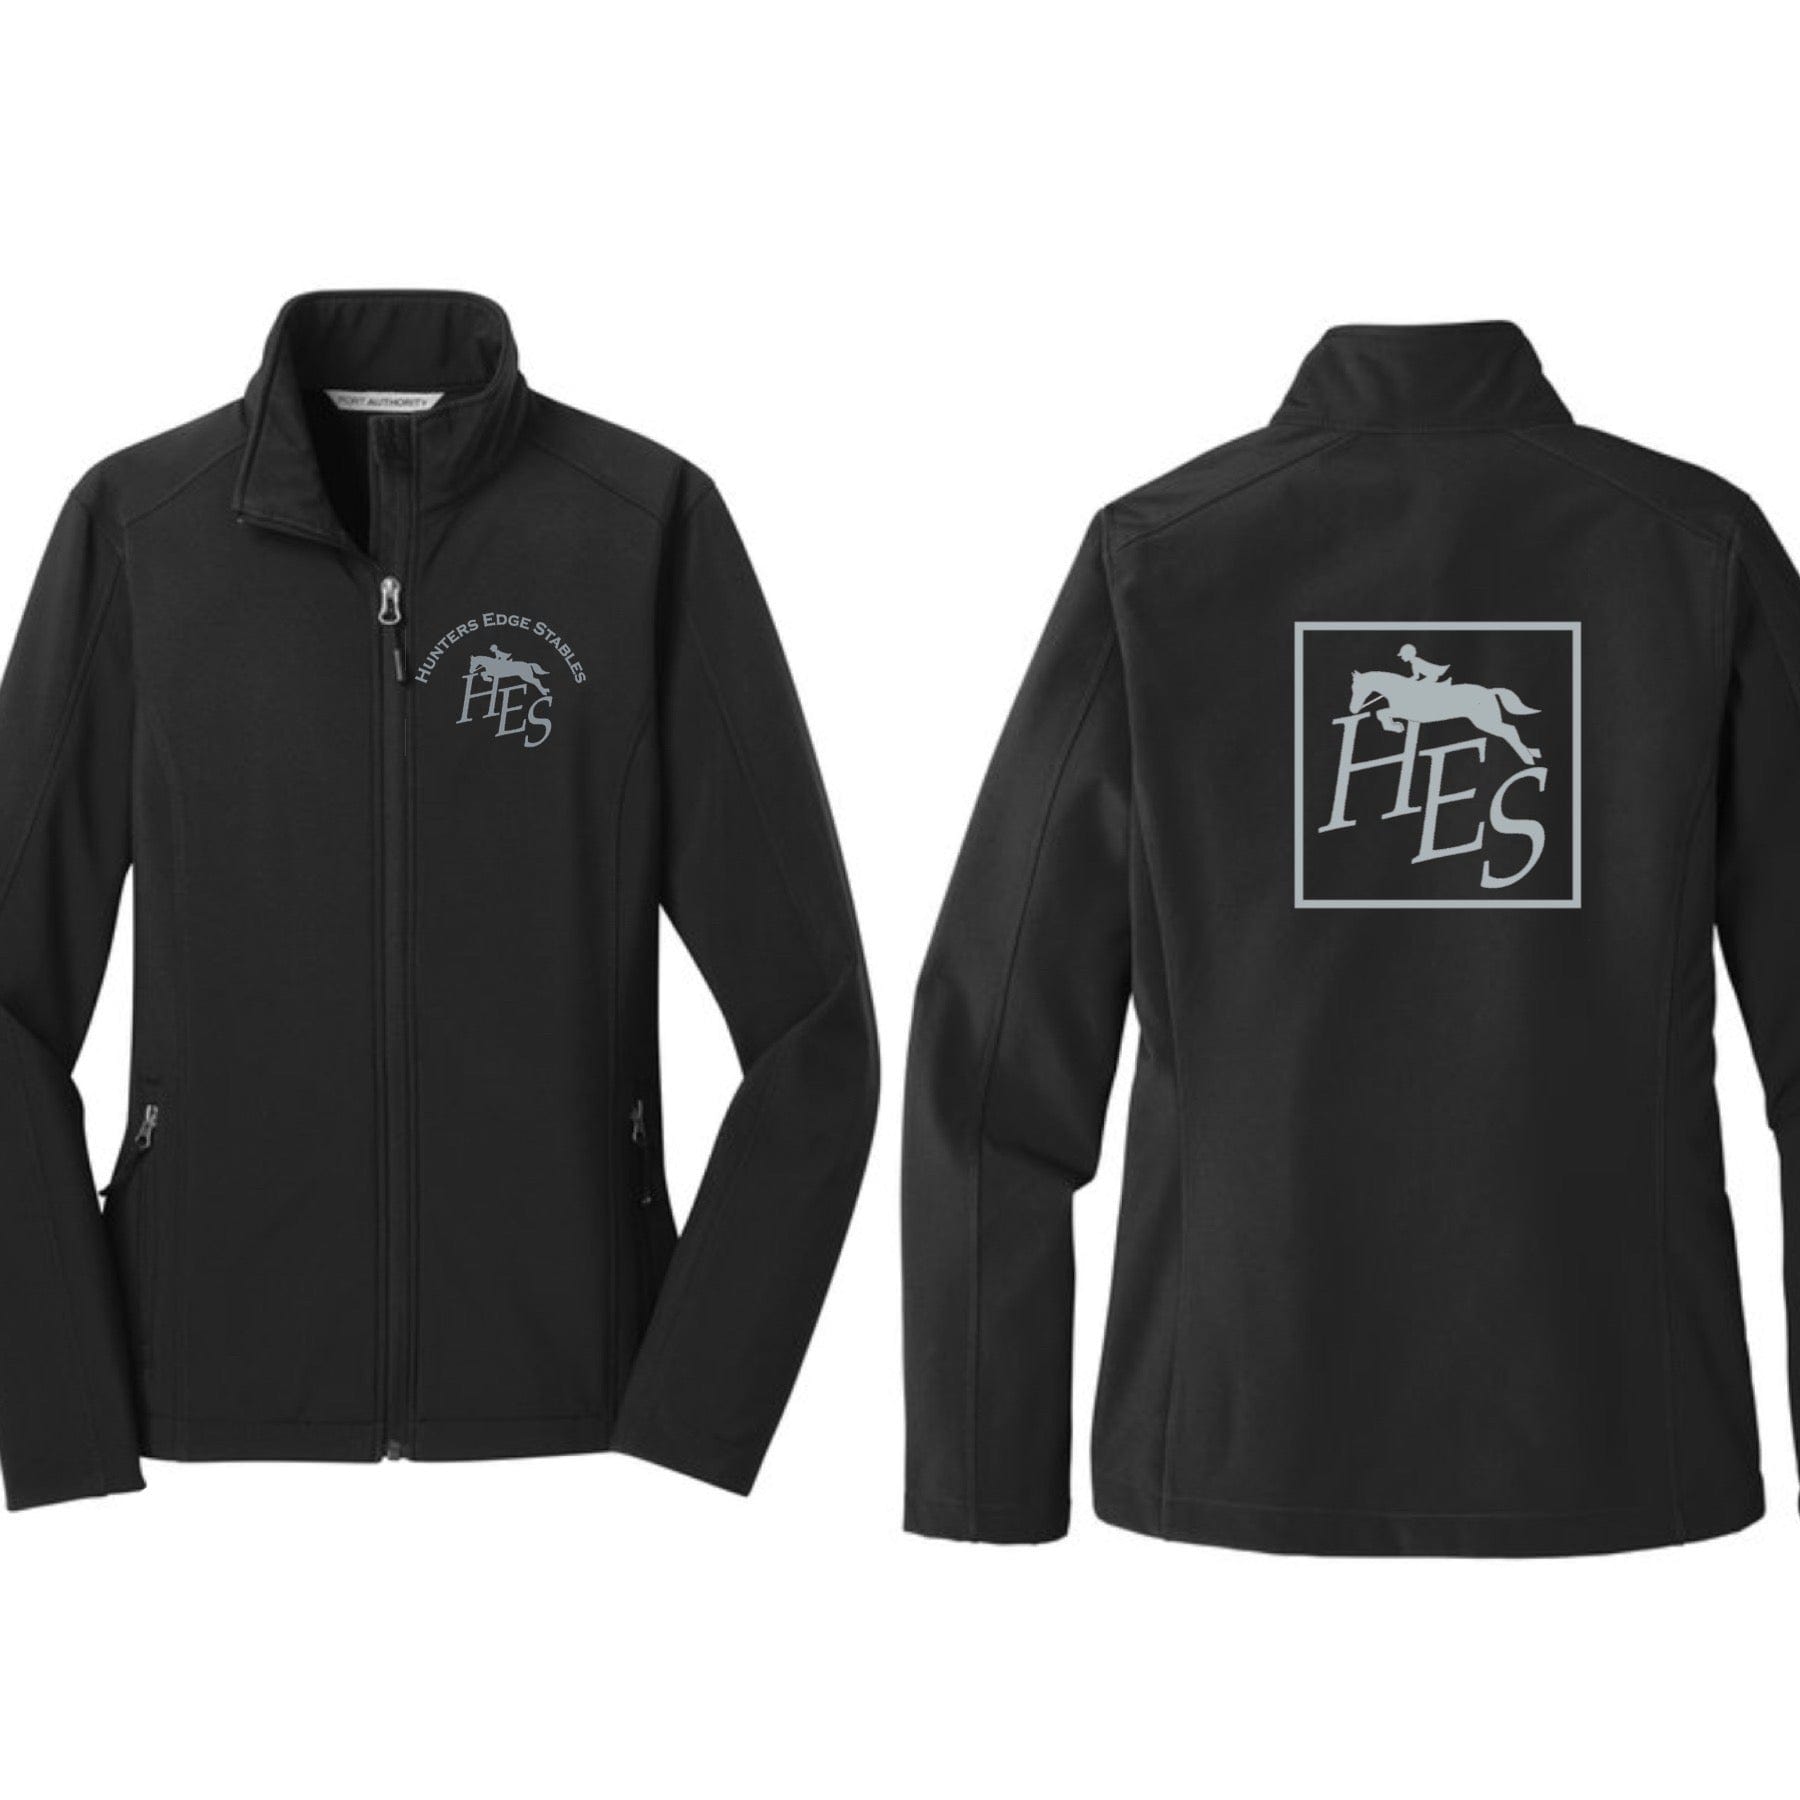 Equestrian Team Apparel Hunters Edge Stables Shell Jacket and Vest equestrian team apparel online tack store mobile tack store custom farm apparel custom show stable clothing equestrian lifestyle horse show clothing riding clothes horses equestrian tack store